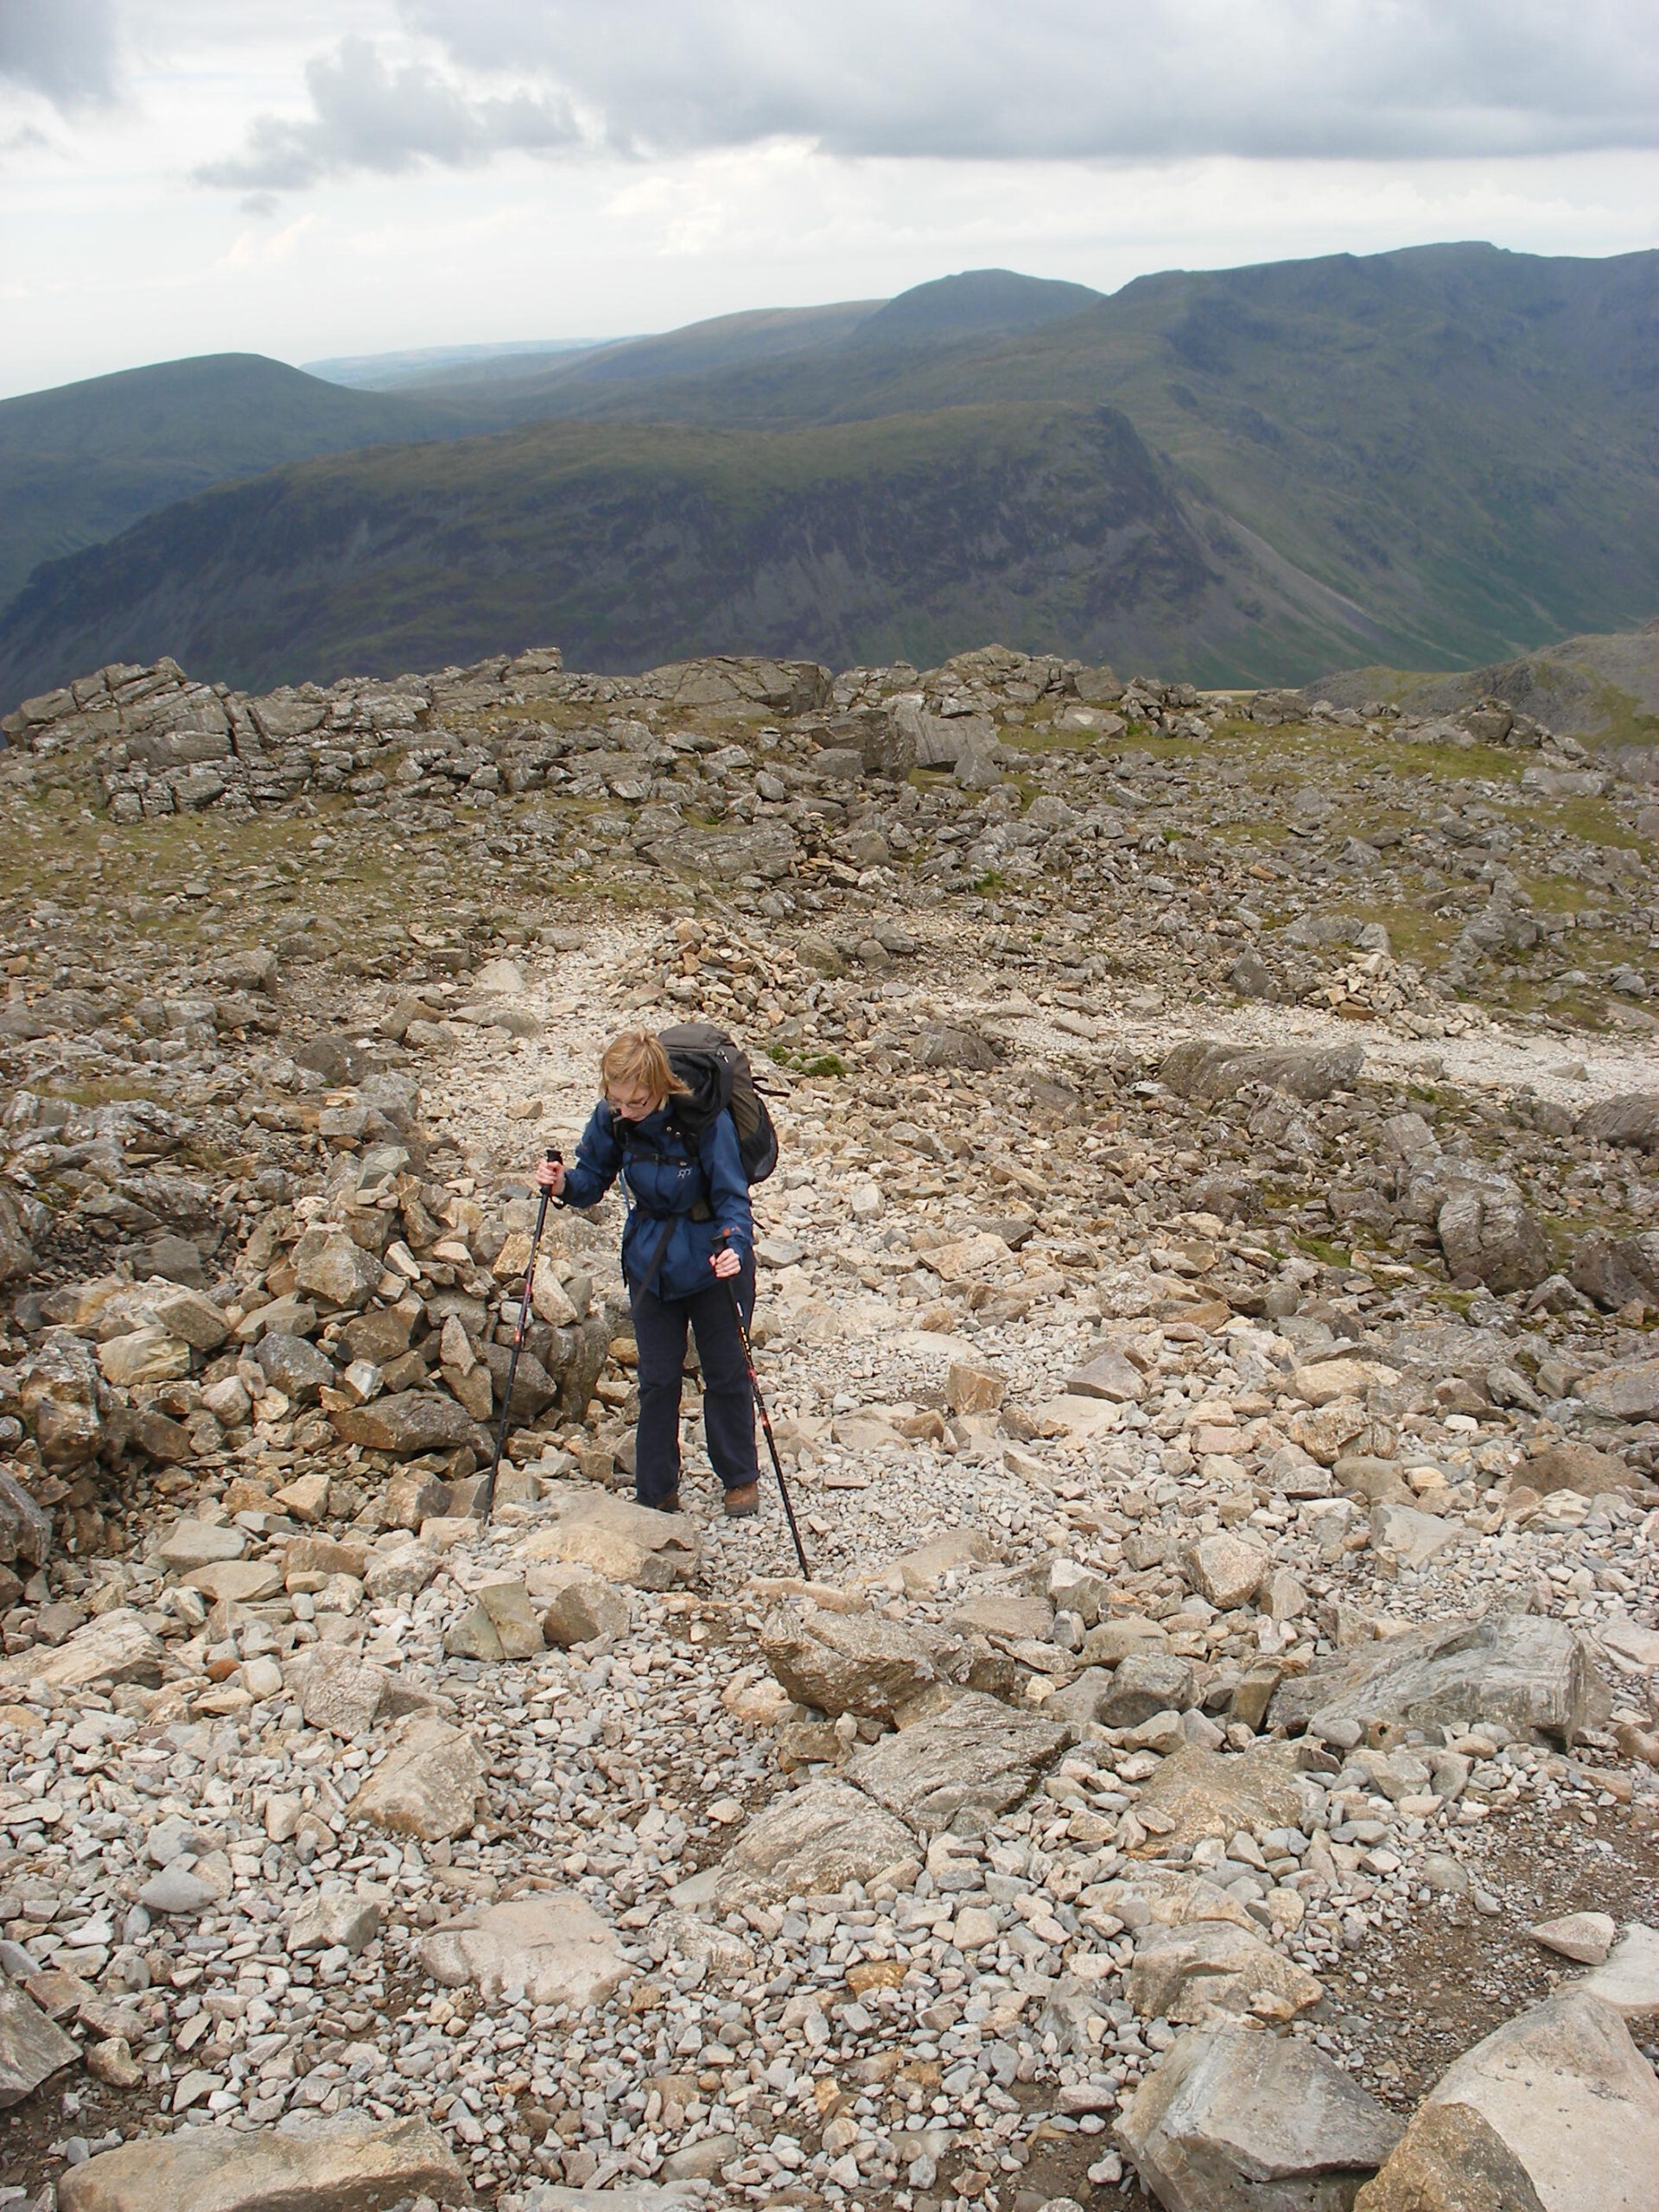 Hanni negotiating a rock with two walking poles on Scafell Pike.